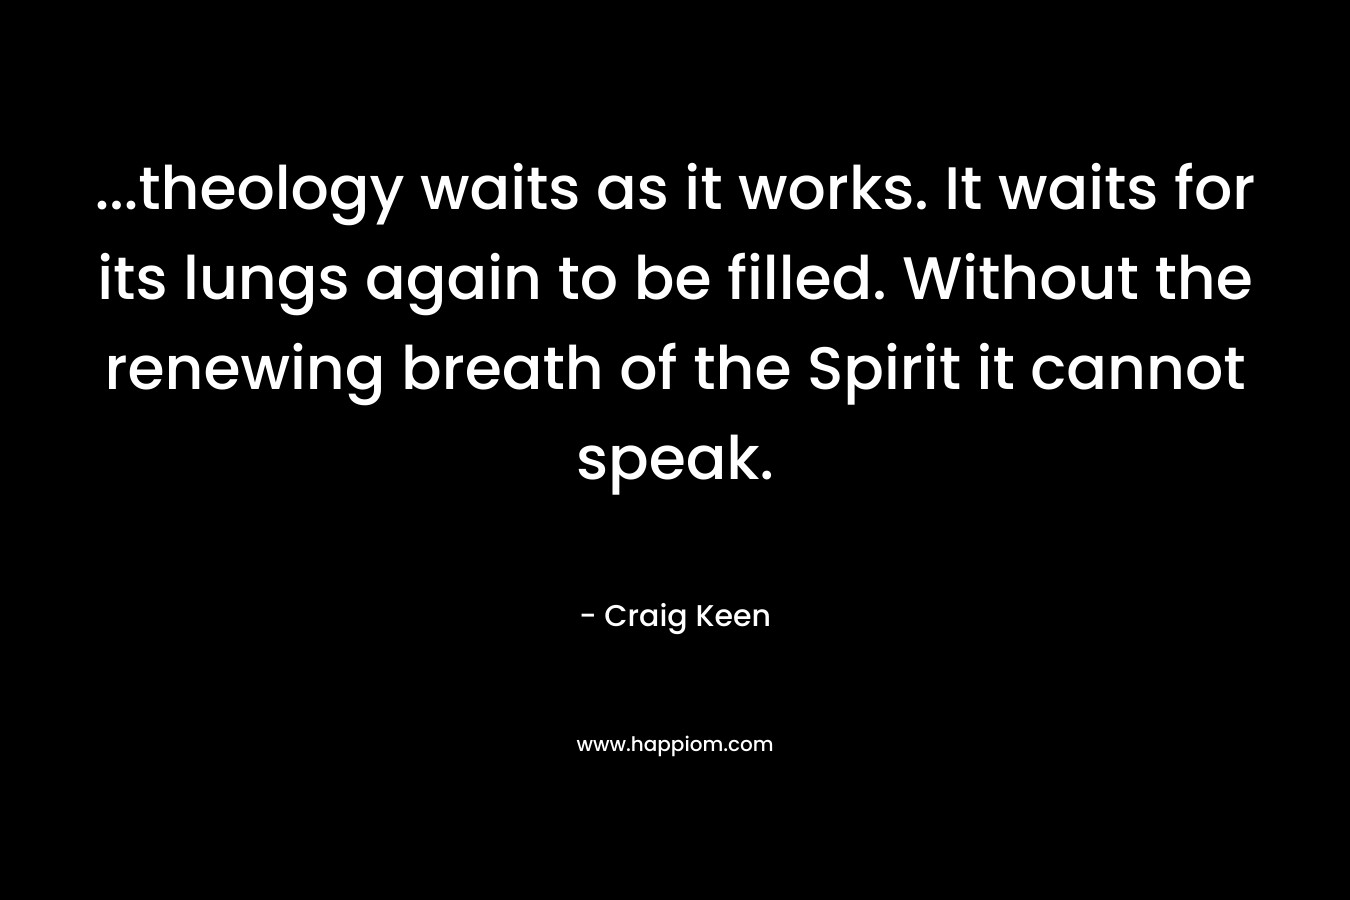 ...theology waits as it works. It waits for its lungs again to be filled. Without the renewing breath of the Spirit it cannot speak.